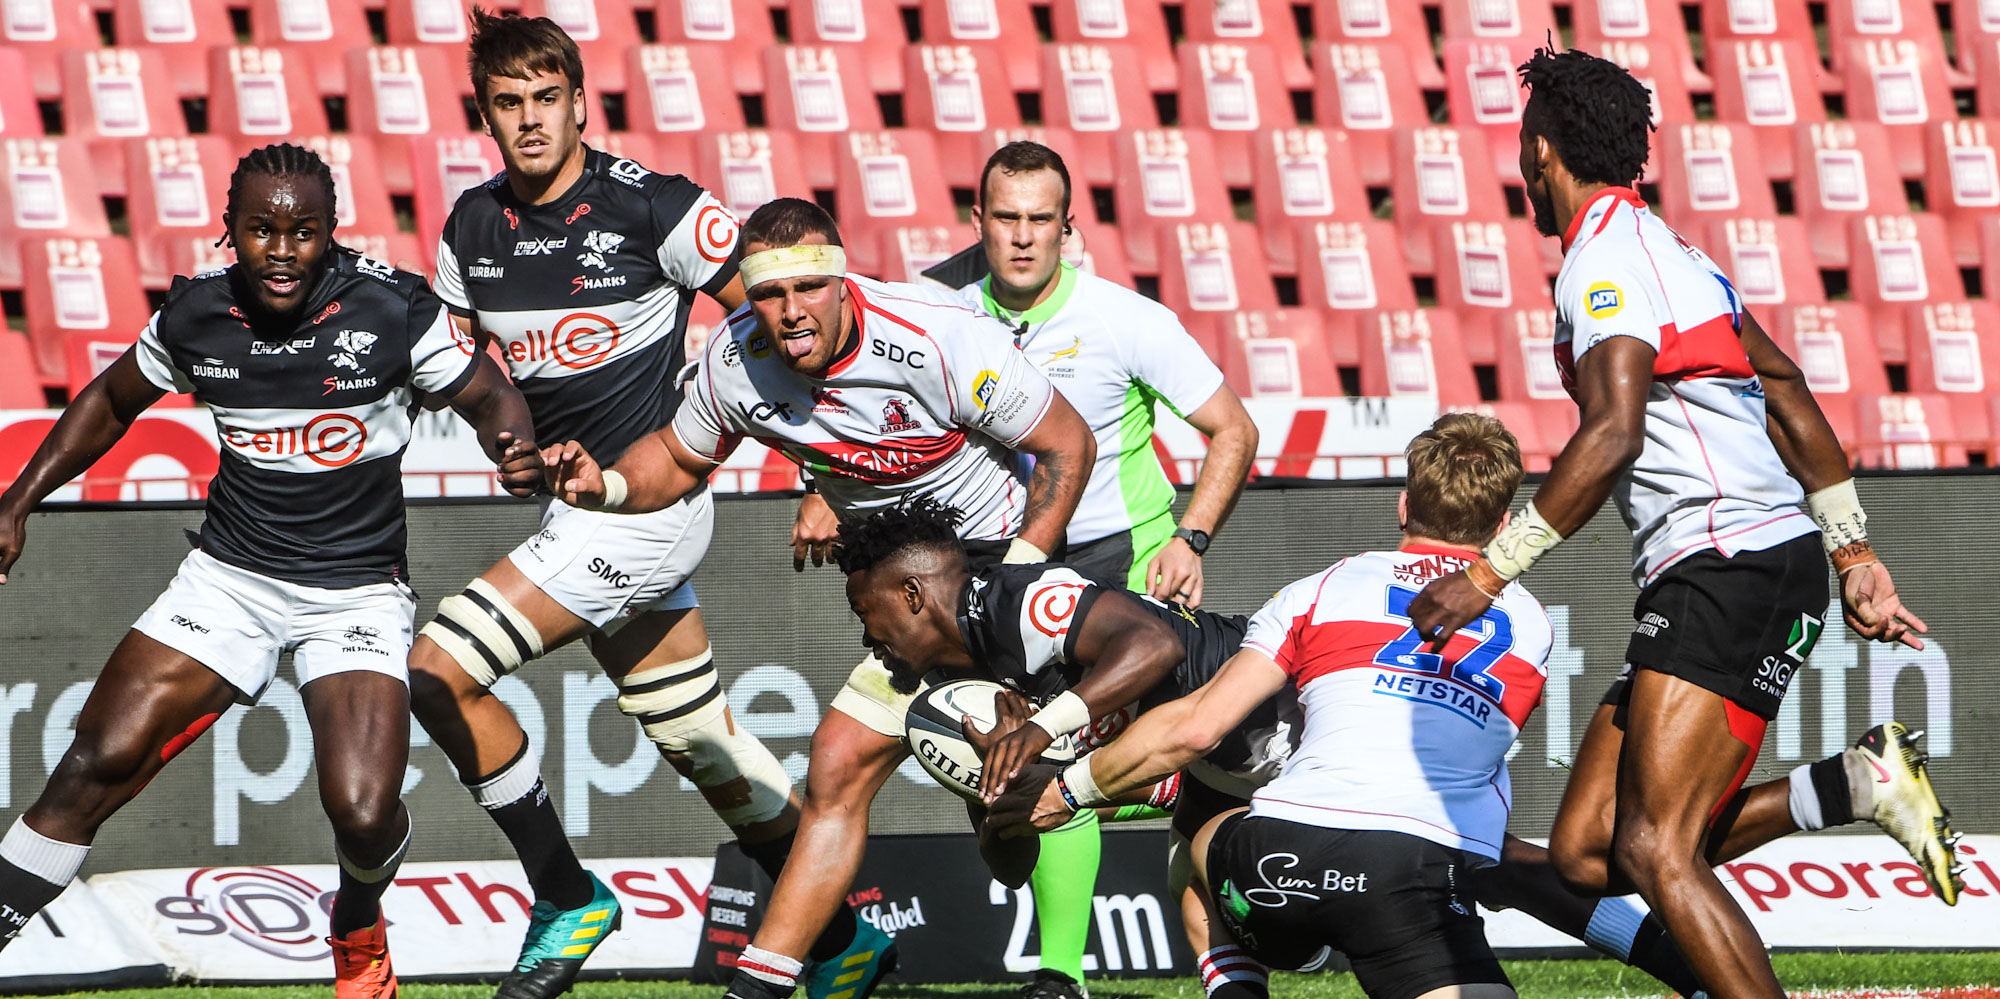 Sanele Nohamba is stopped in last year's Carling Currie Cup clash between the Cell C Sharks and Sigma Lions.